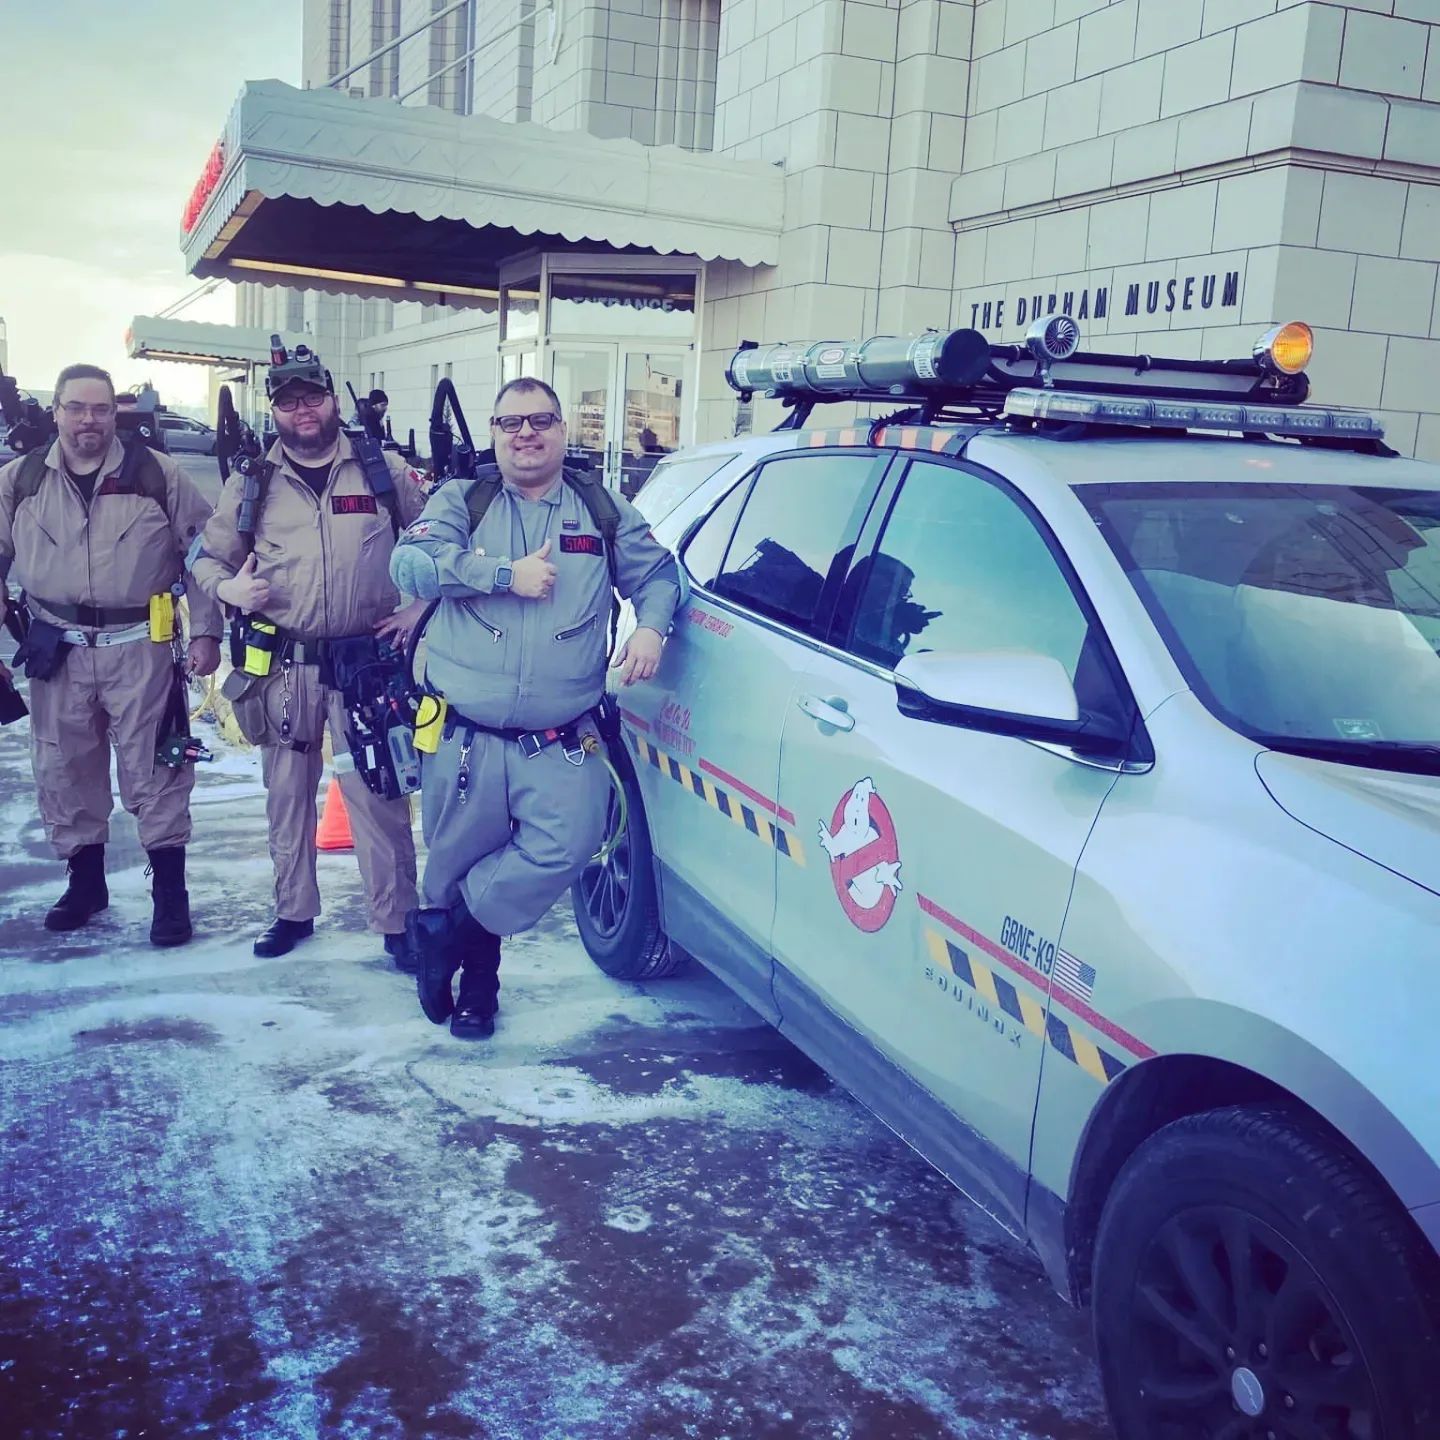 Damian, The EctoK9 Unit, and members of Ghostbusters - Nebraska Division at an event.